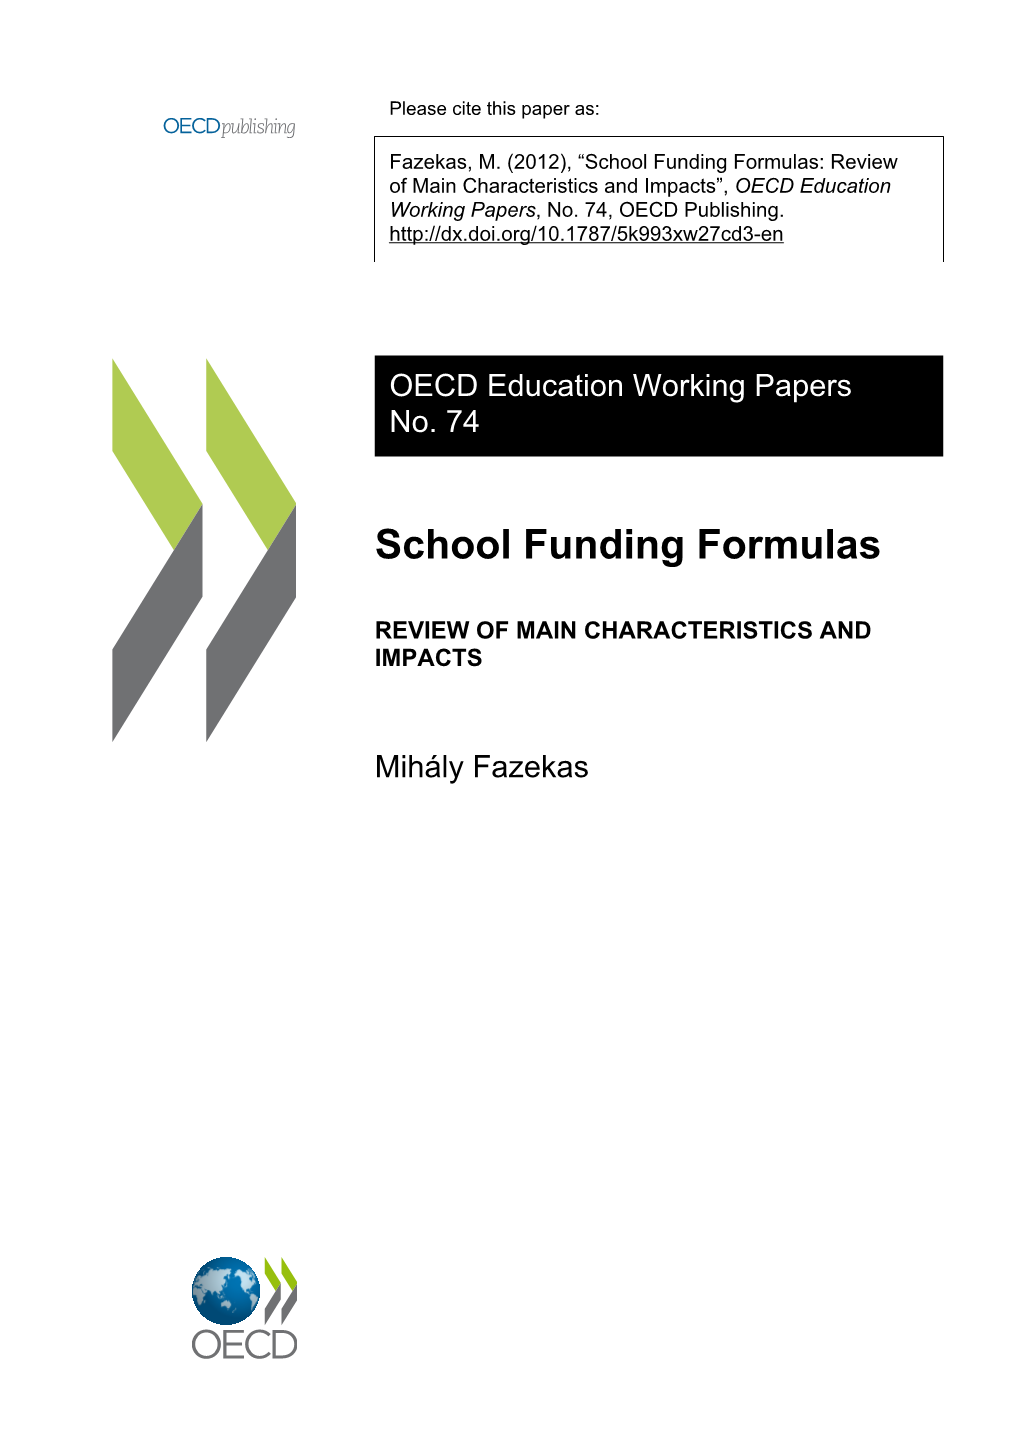 School Funding Formulas: Review of Main Characteristics and Impacts”, OECD Education Working Papers, No